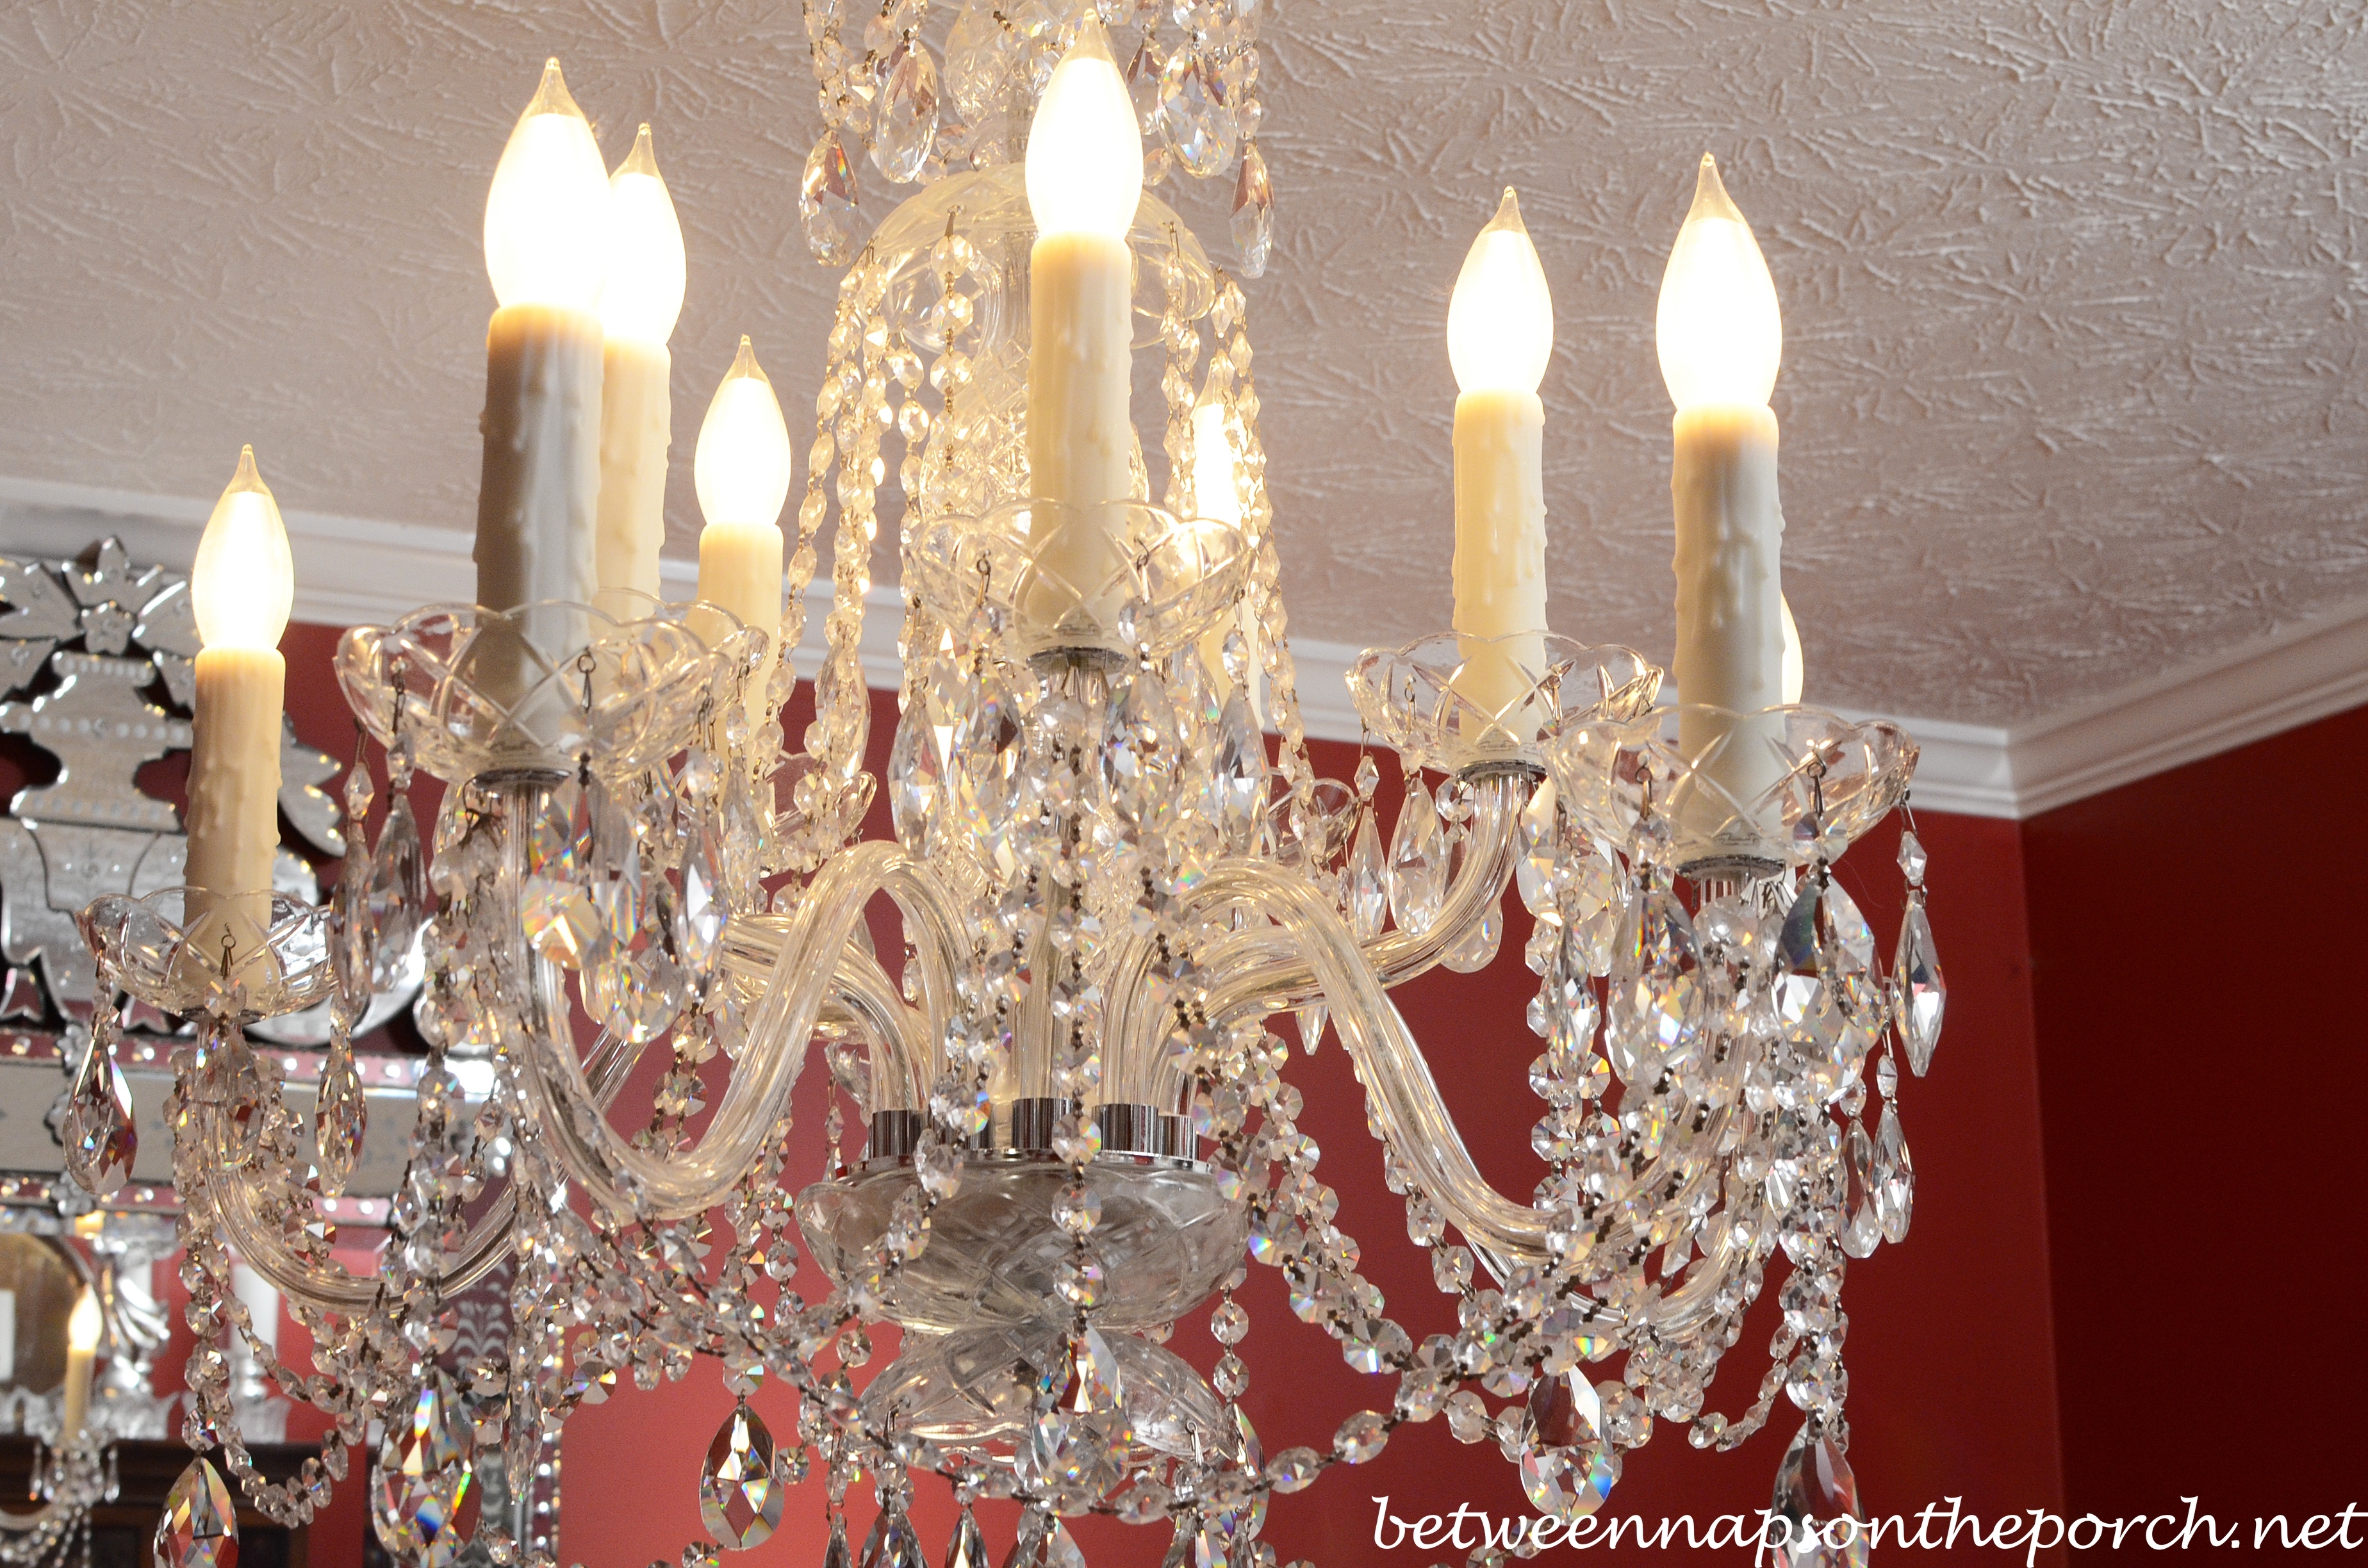 Transform An Ordinary Chandelier With Resin Candle Covers And Silk within sizing 3696 X 2448